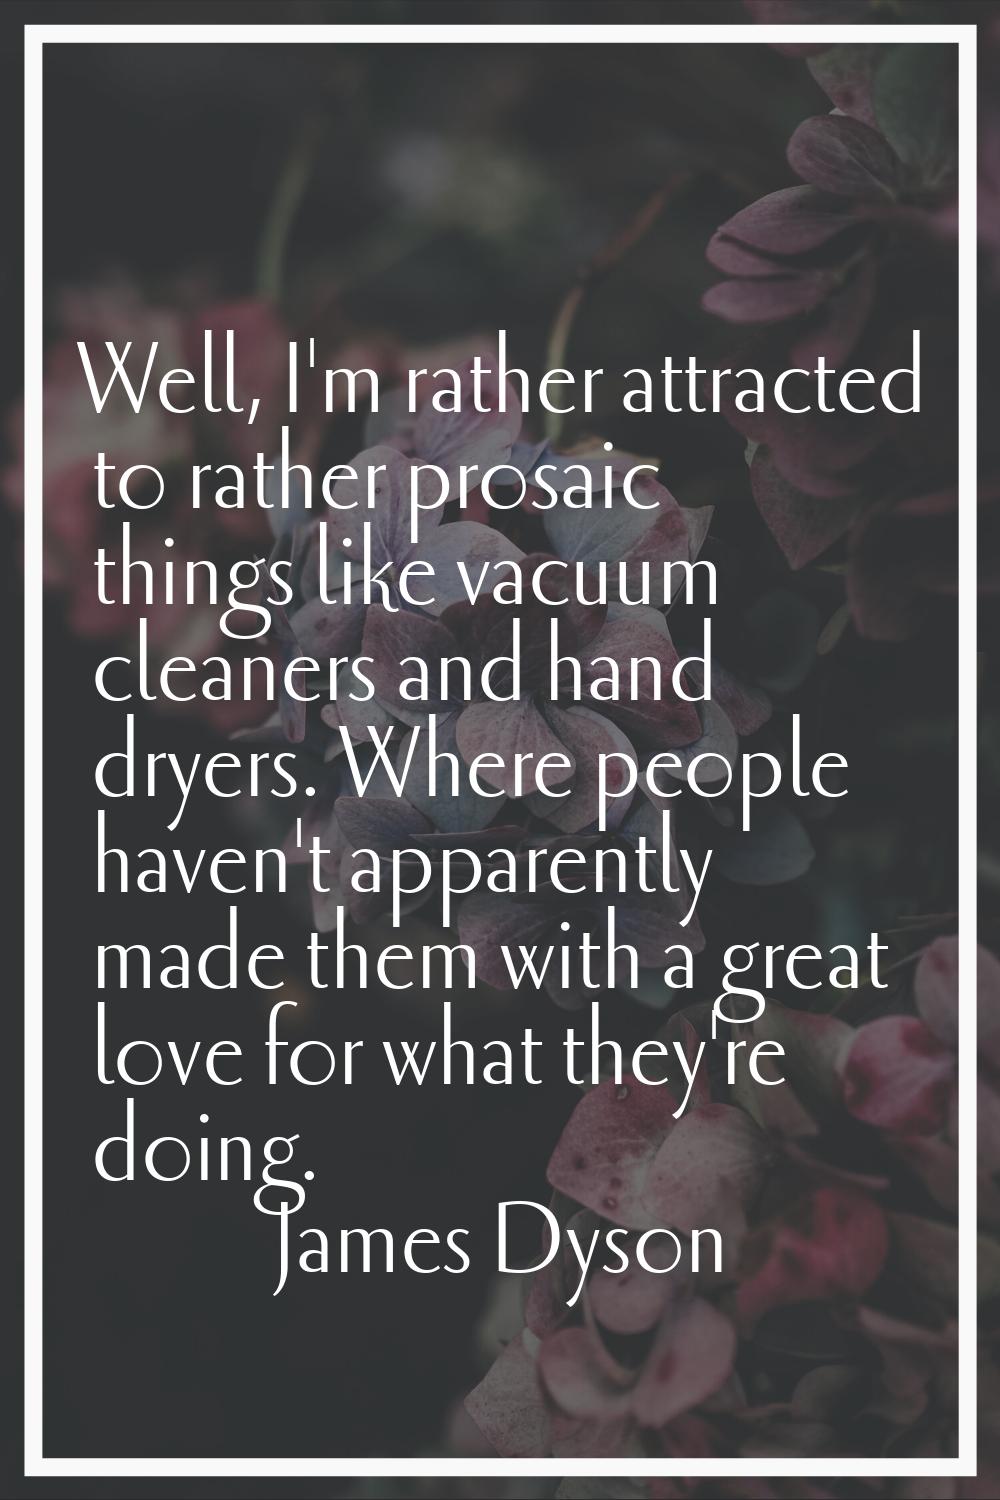 Well, I'm rather attracted to rather prosaic things like vacuum cleaners and hand dryers. Where peo